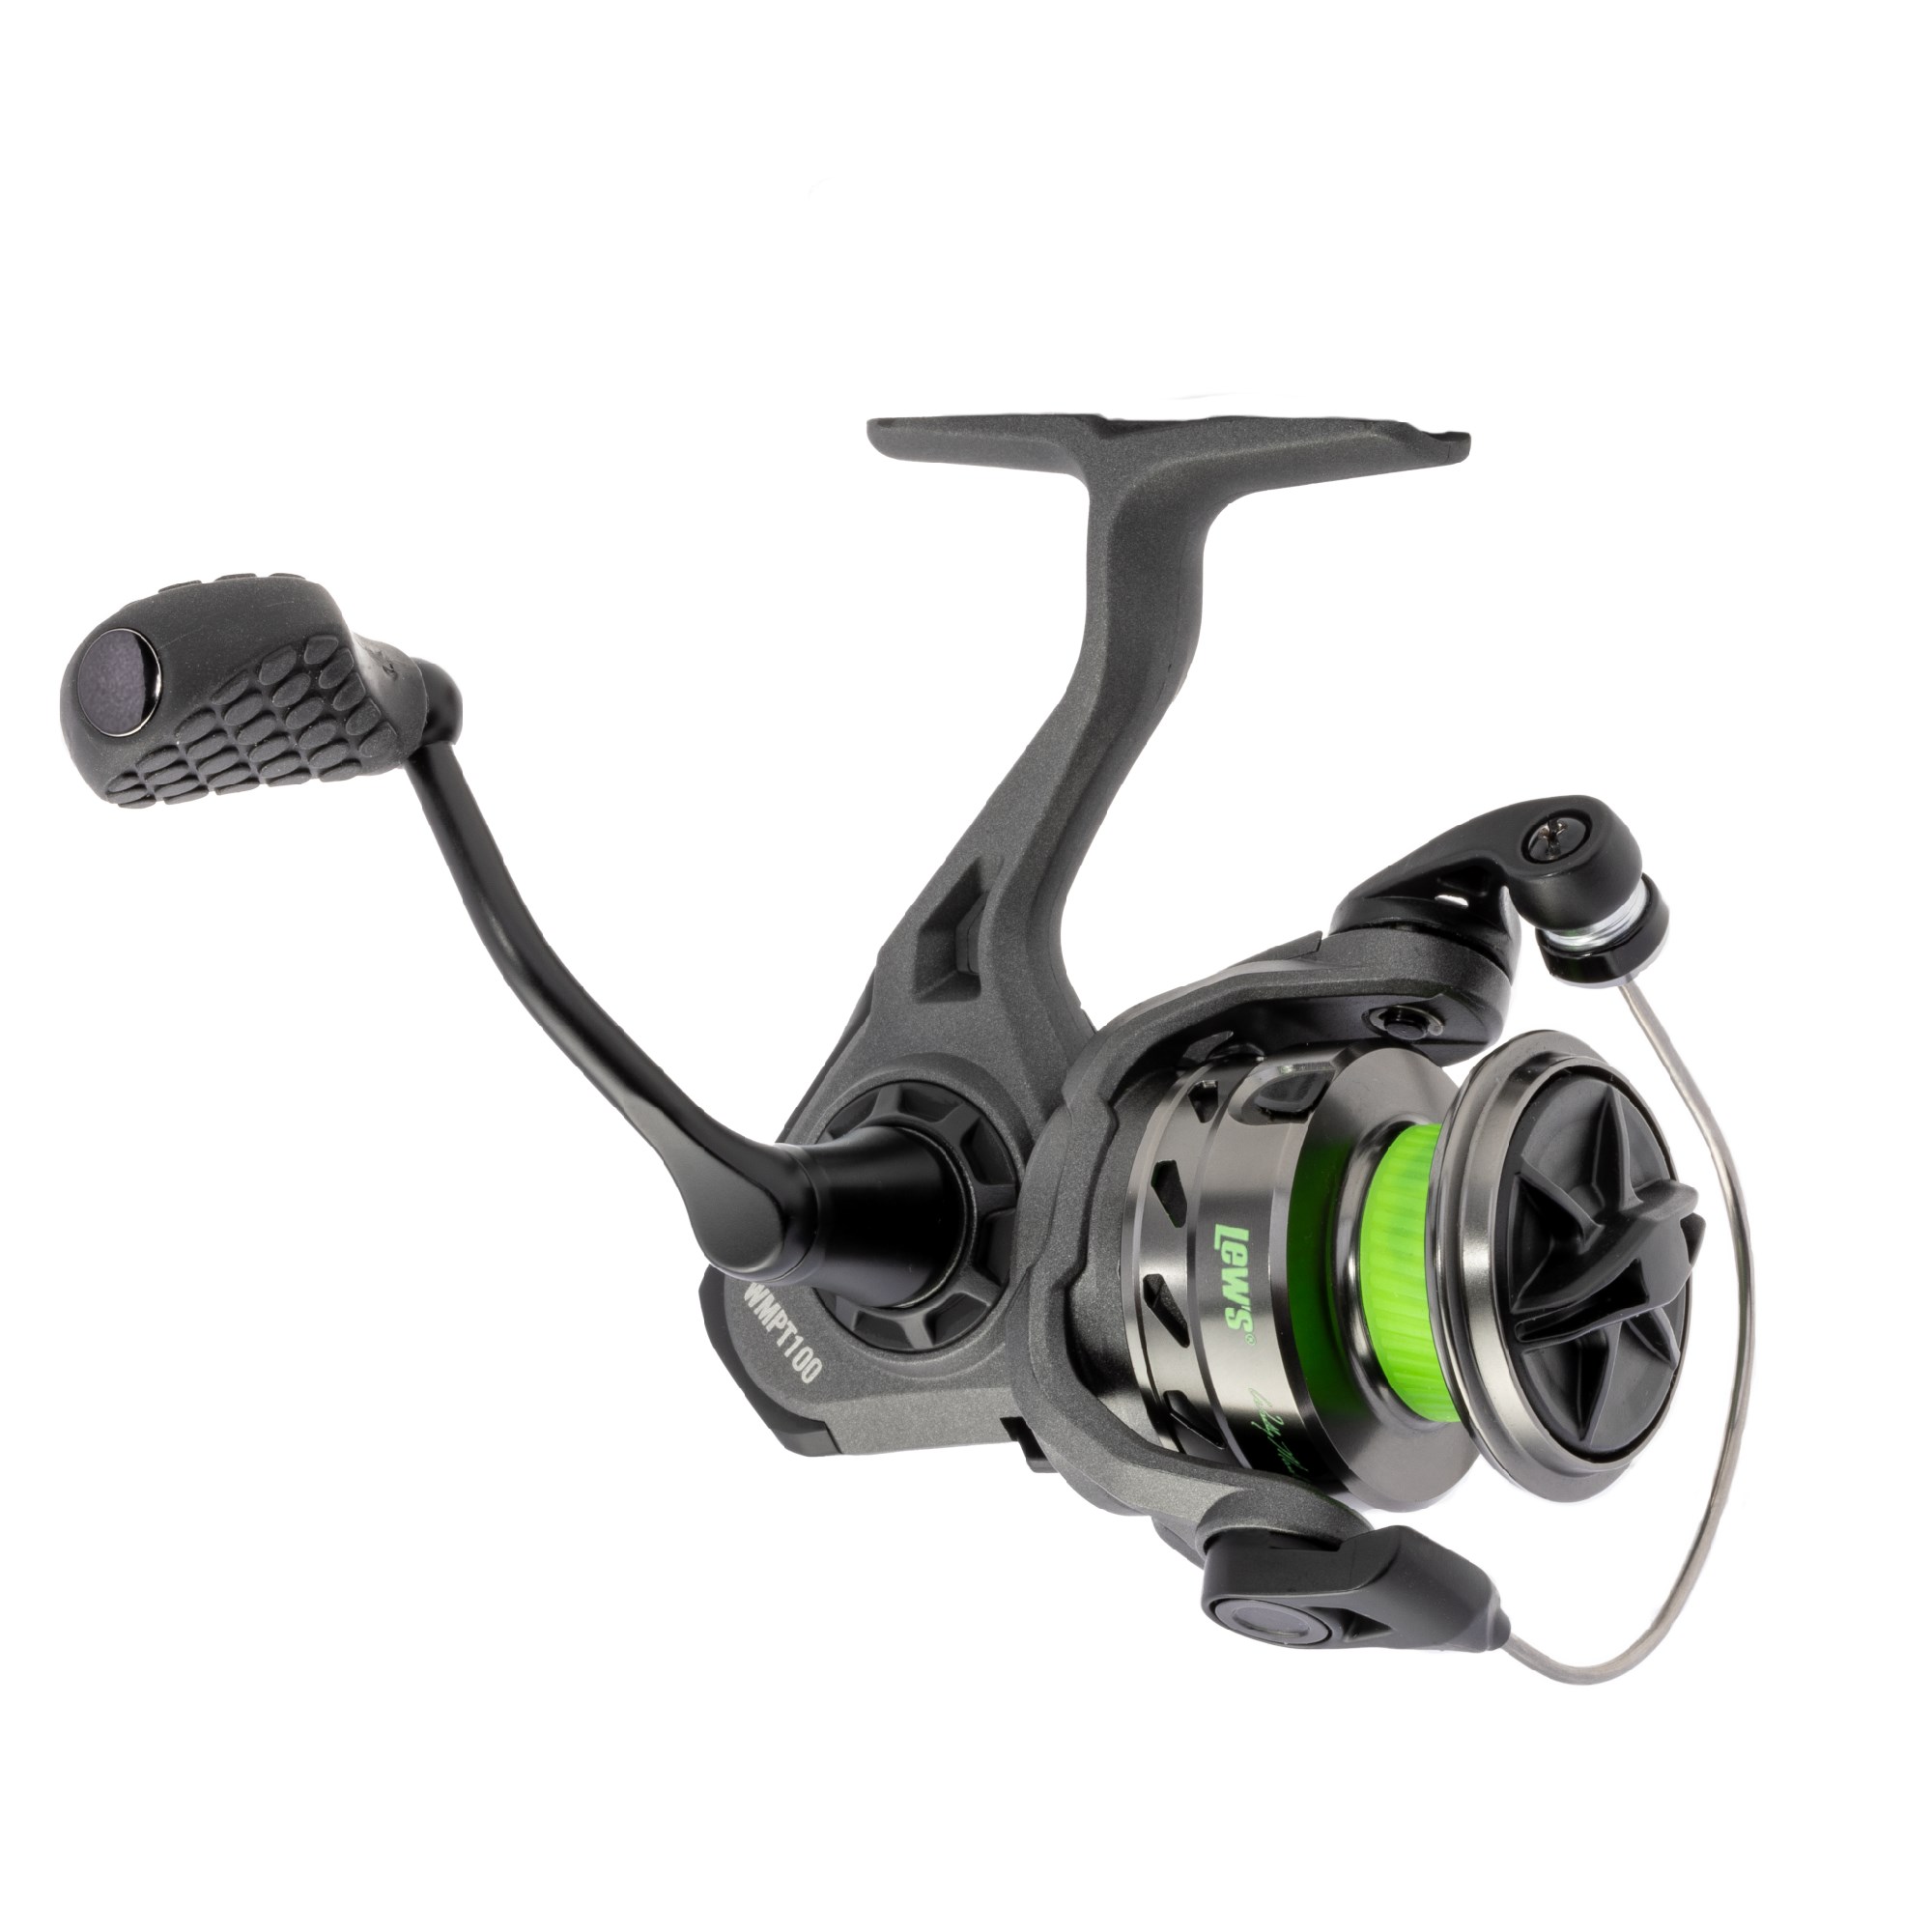 Mr. Crappie Wally Marshall Pro Target Spin Reel